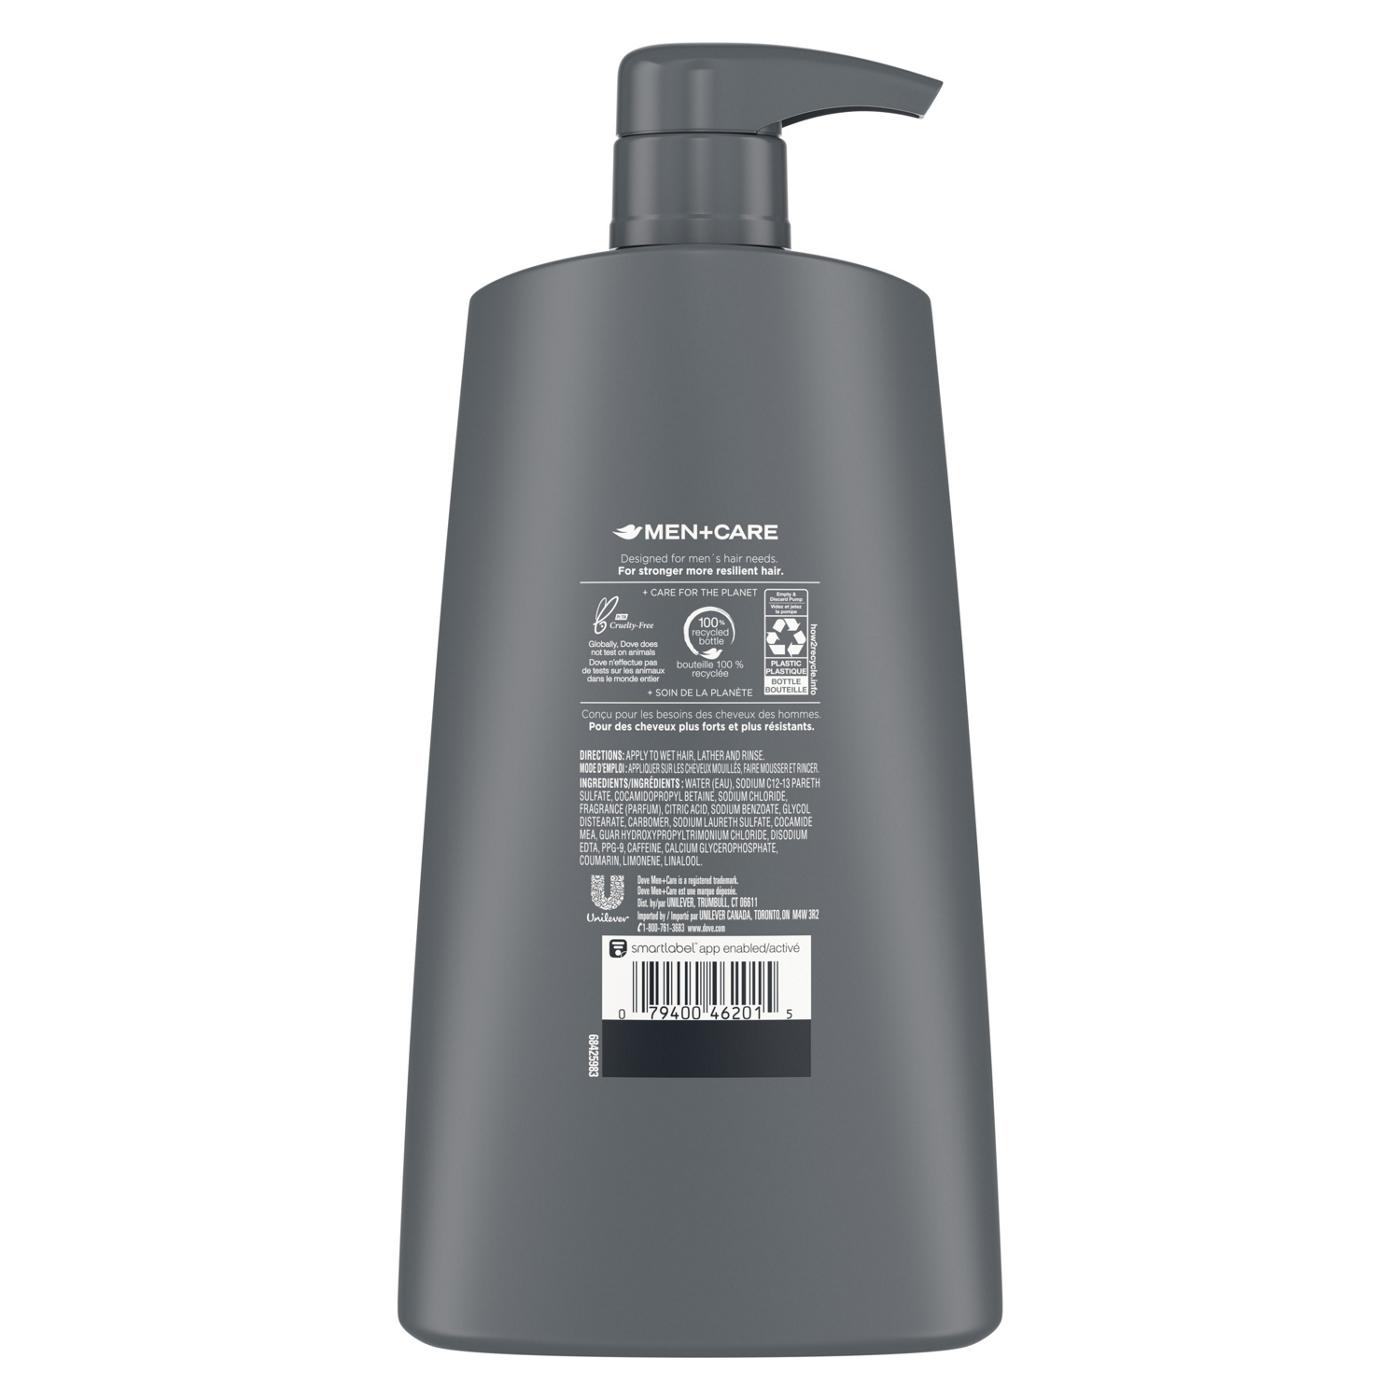 Dove Men+Care Shampoo + Conditioner - Thick & Strong; image 5 of 6